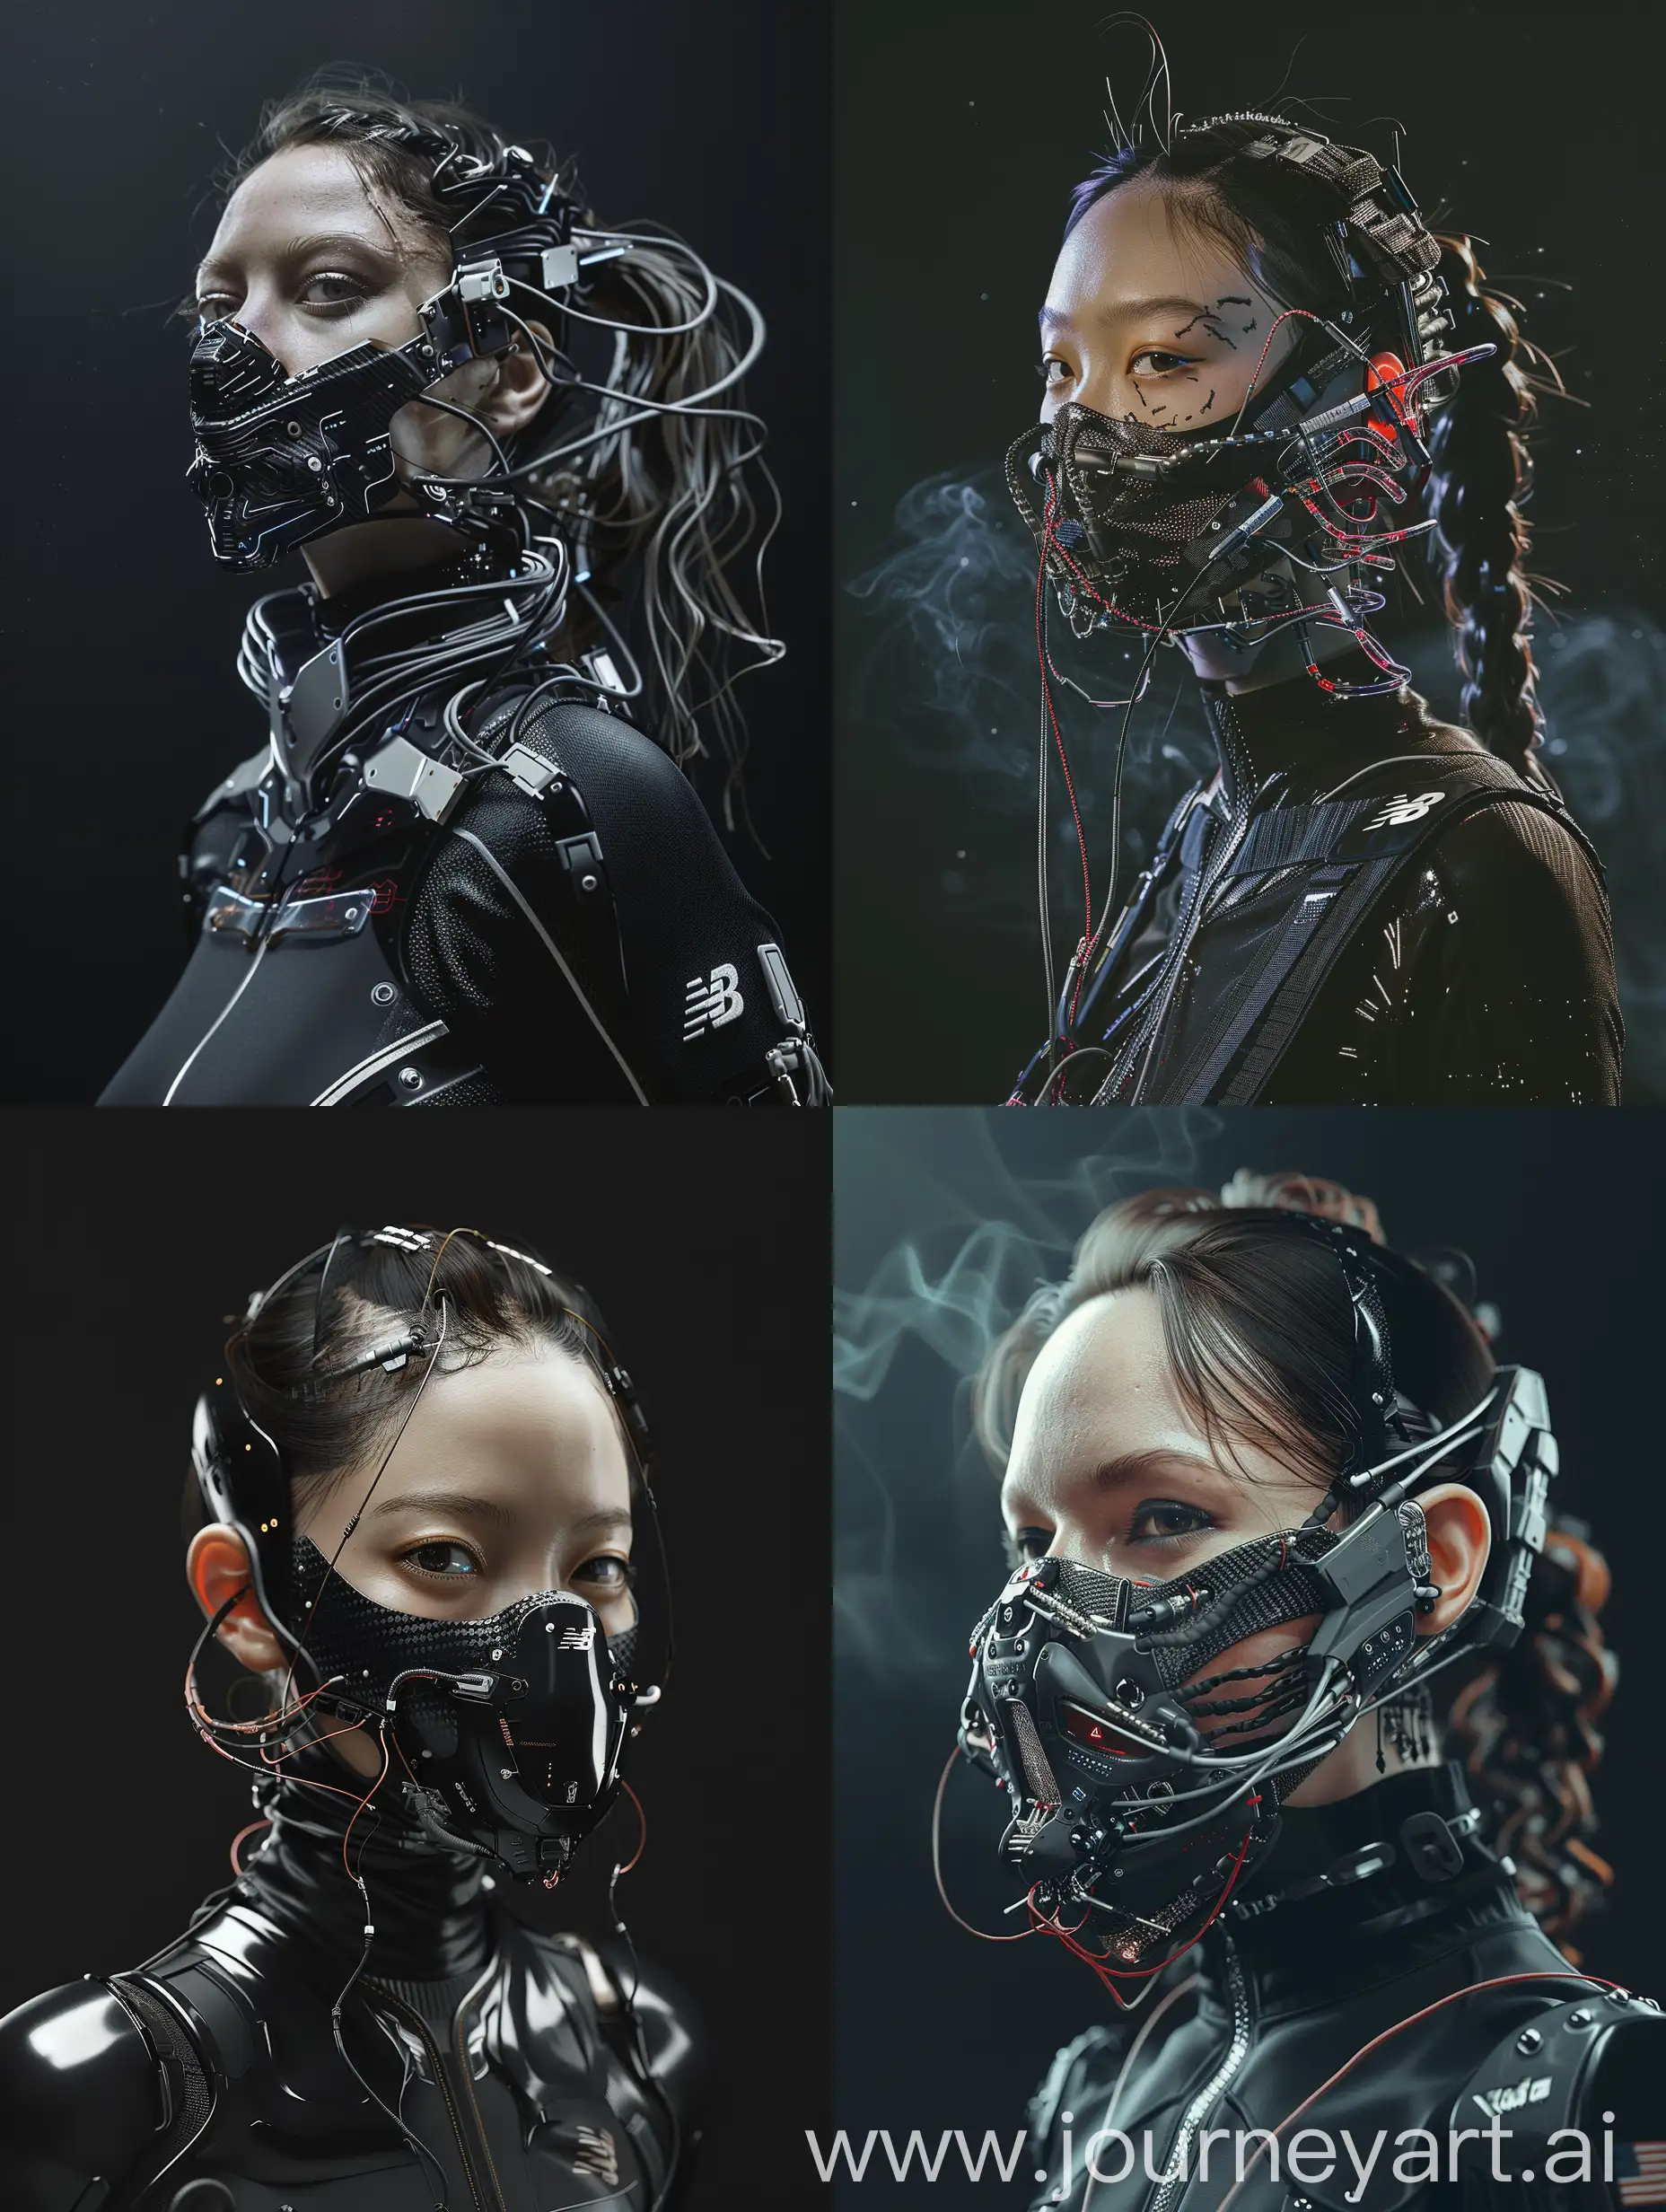 Futuristic-Cyberpunk-Character-with-Cybernetic-Mask-in-Dynamic-Motion